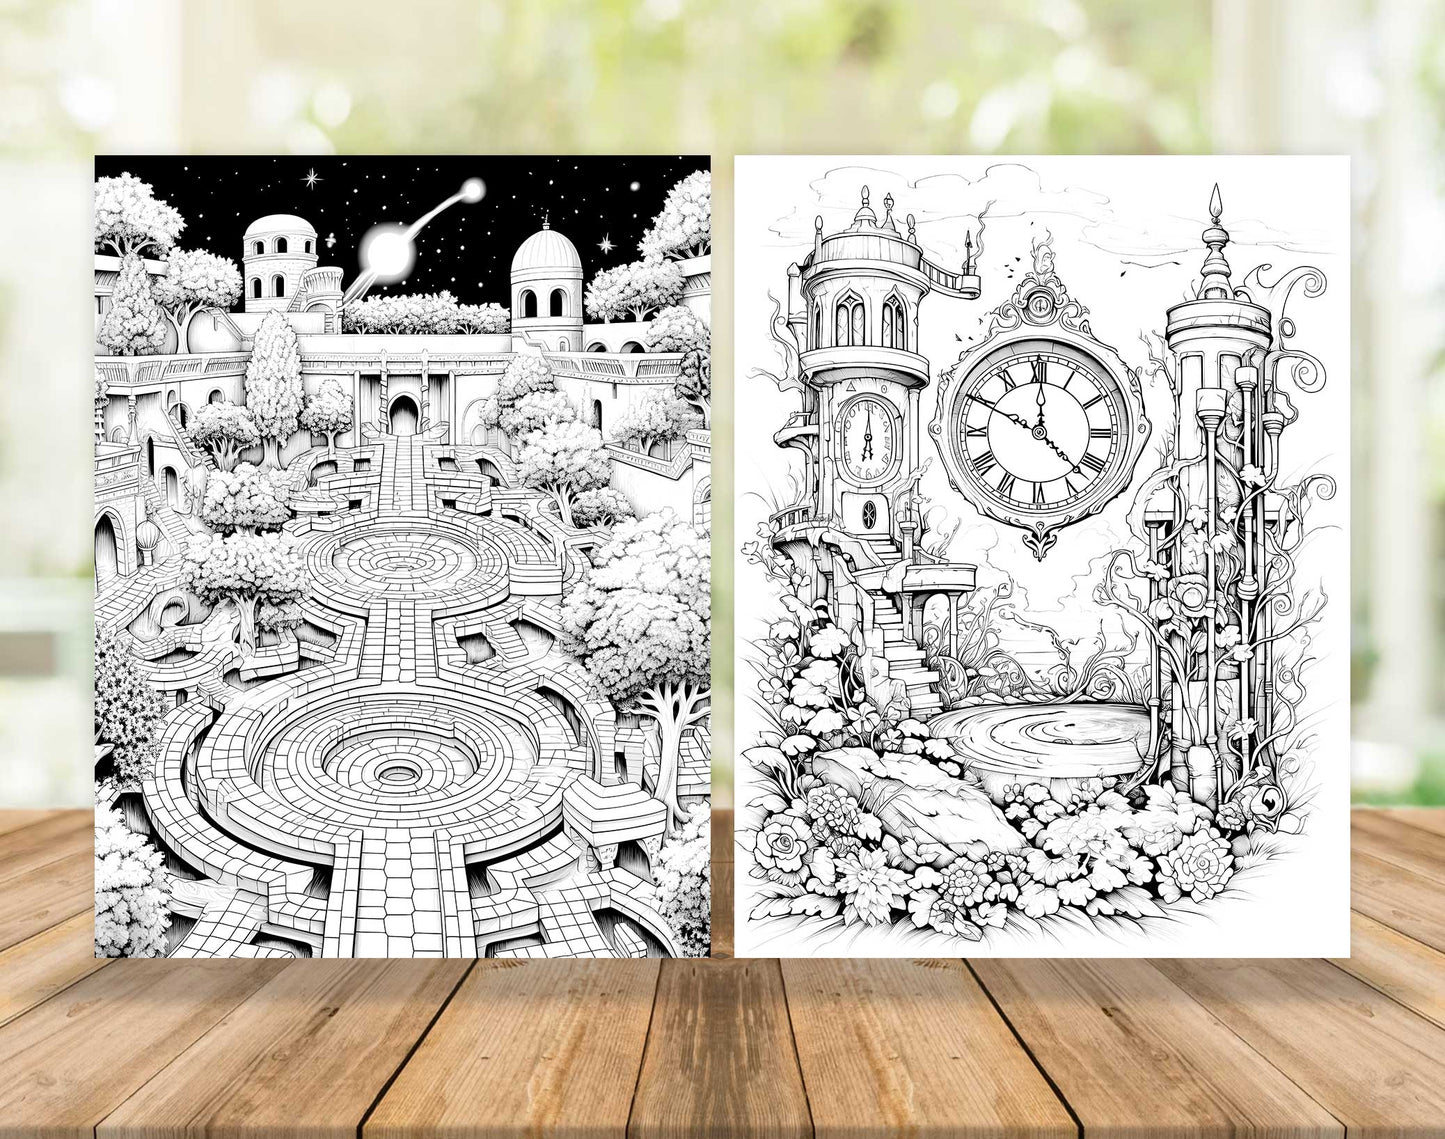 70 Enchanted Multiverse Coloring Pages - Instant Download - Printable